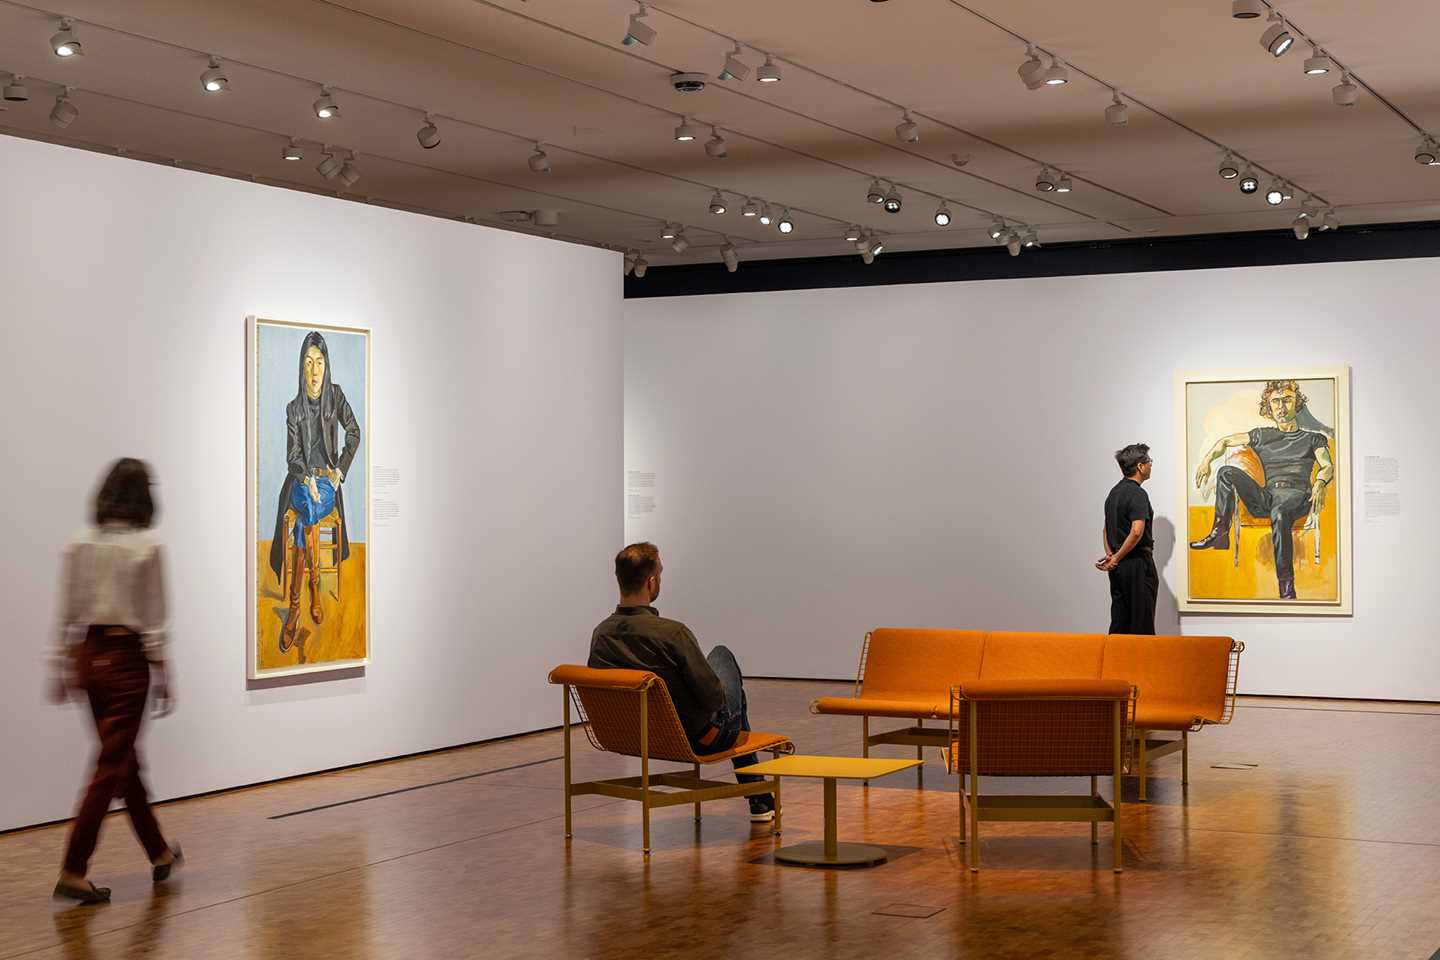 Installation view of the exhibition "Alice Neel: Every Person is a New Universe". Photo: Munchmuseet